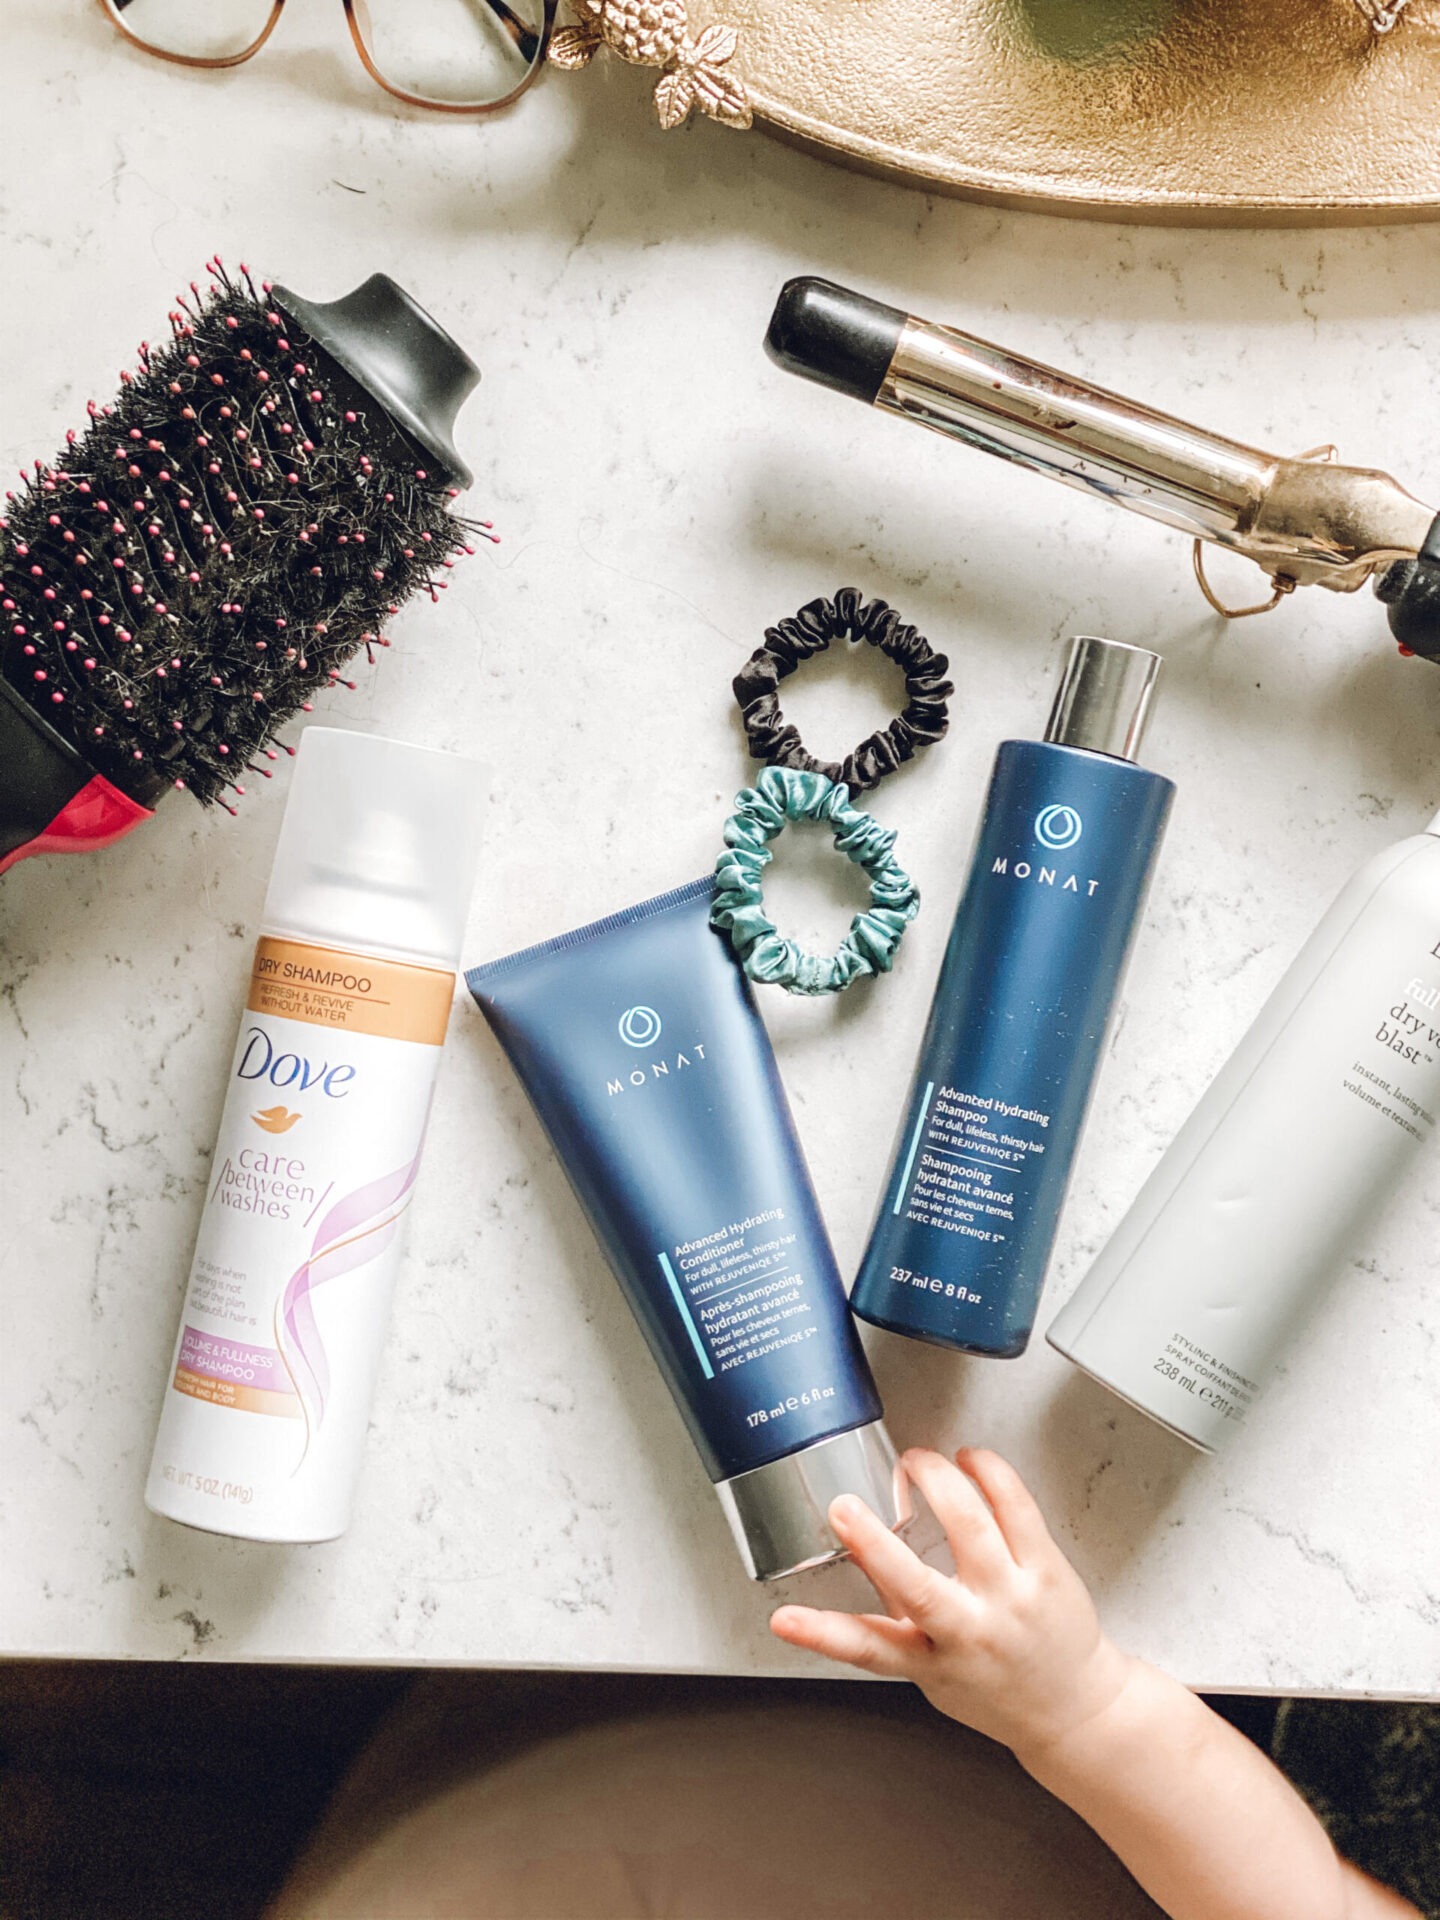 Hair routine with monat hair products